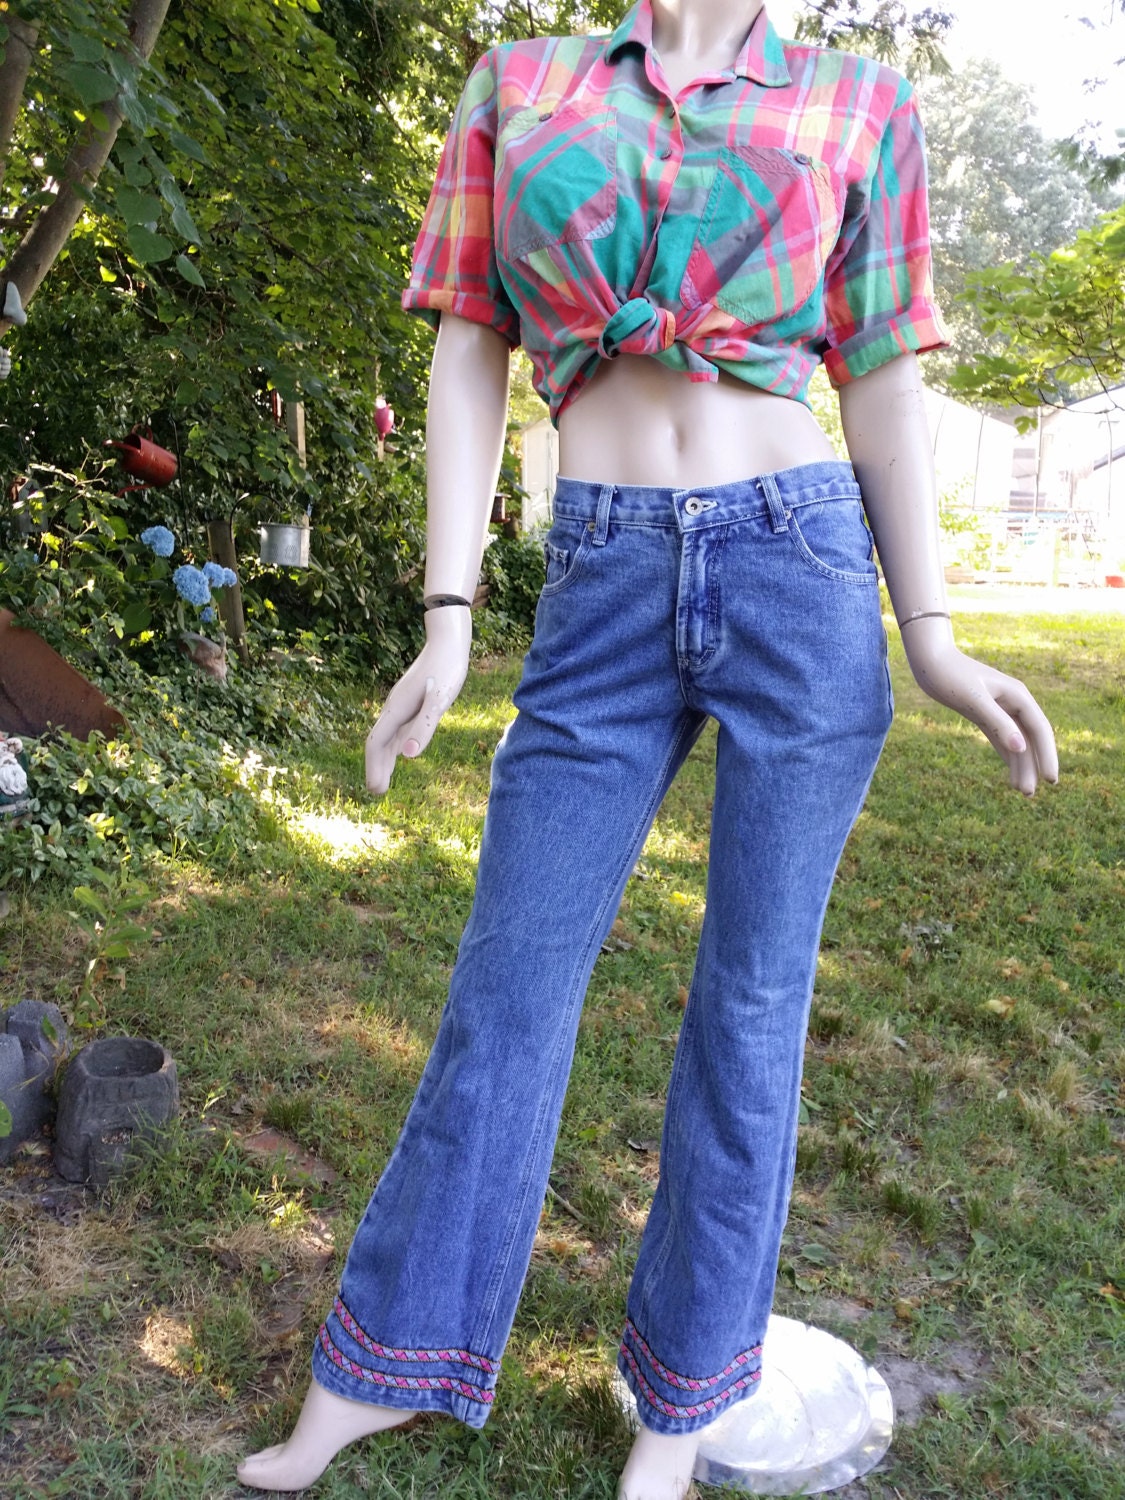 Top Christmas Deals Vintage Bell Bottoms Jeans for Women 90s High